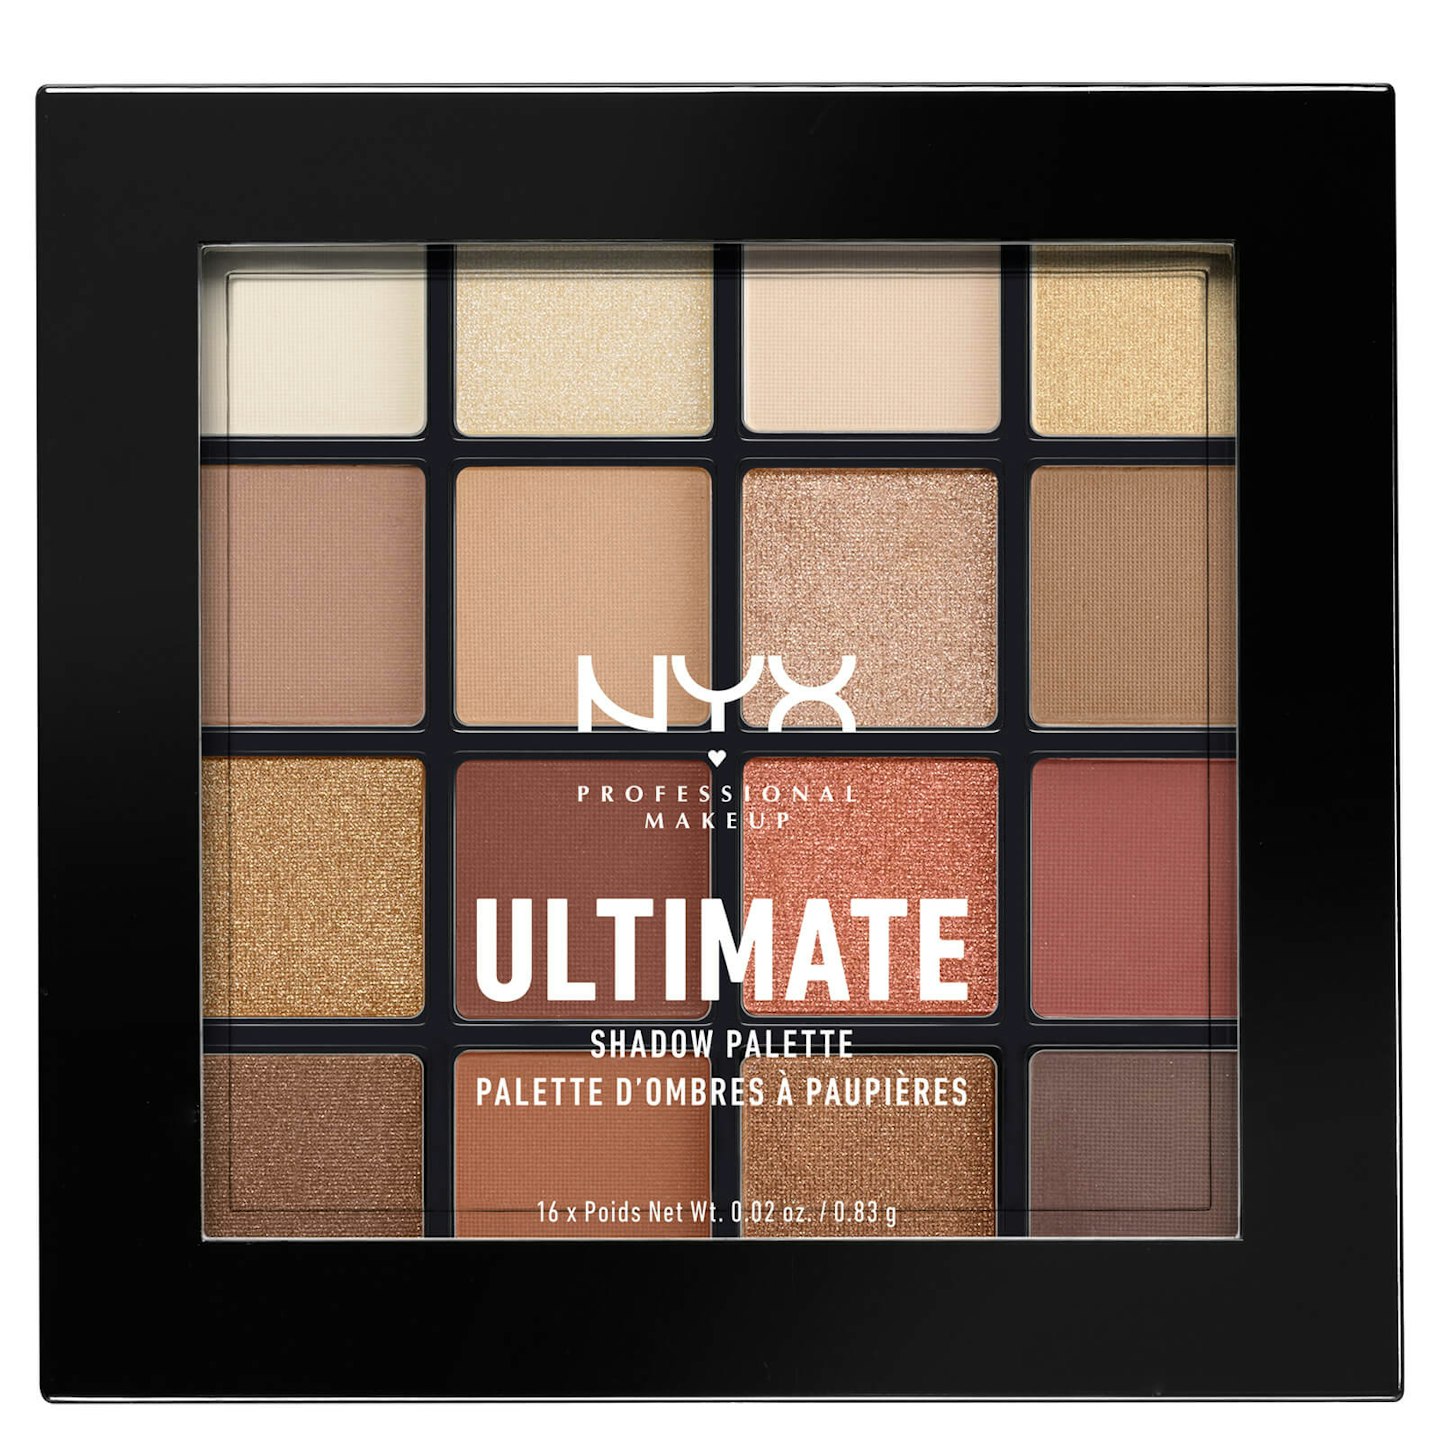 NYX Professional Makeup Ultimate Shadow Palette, £12.80